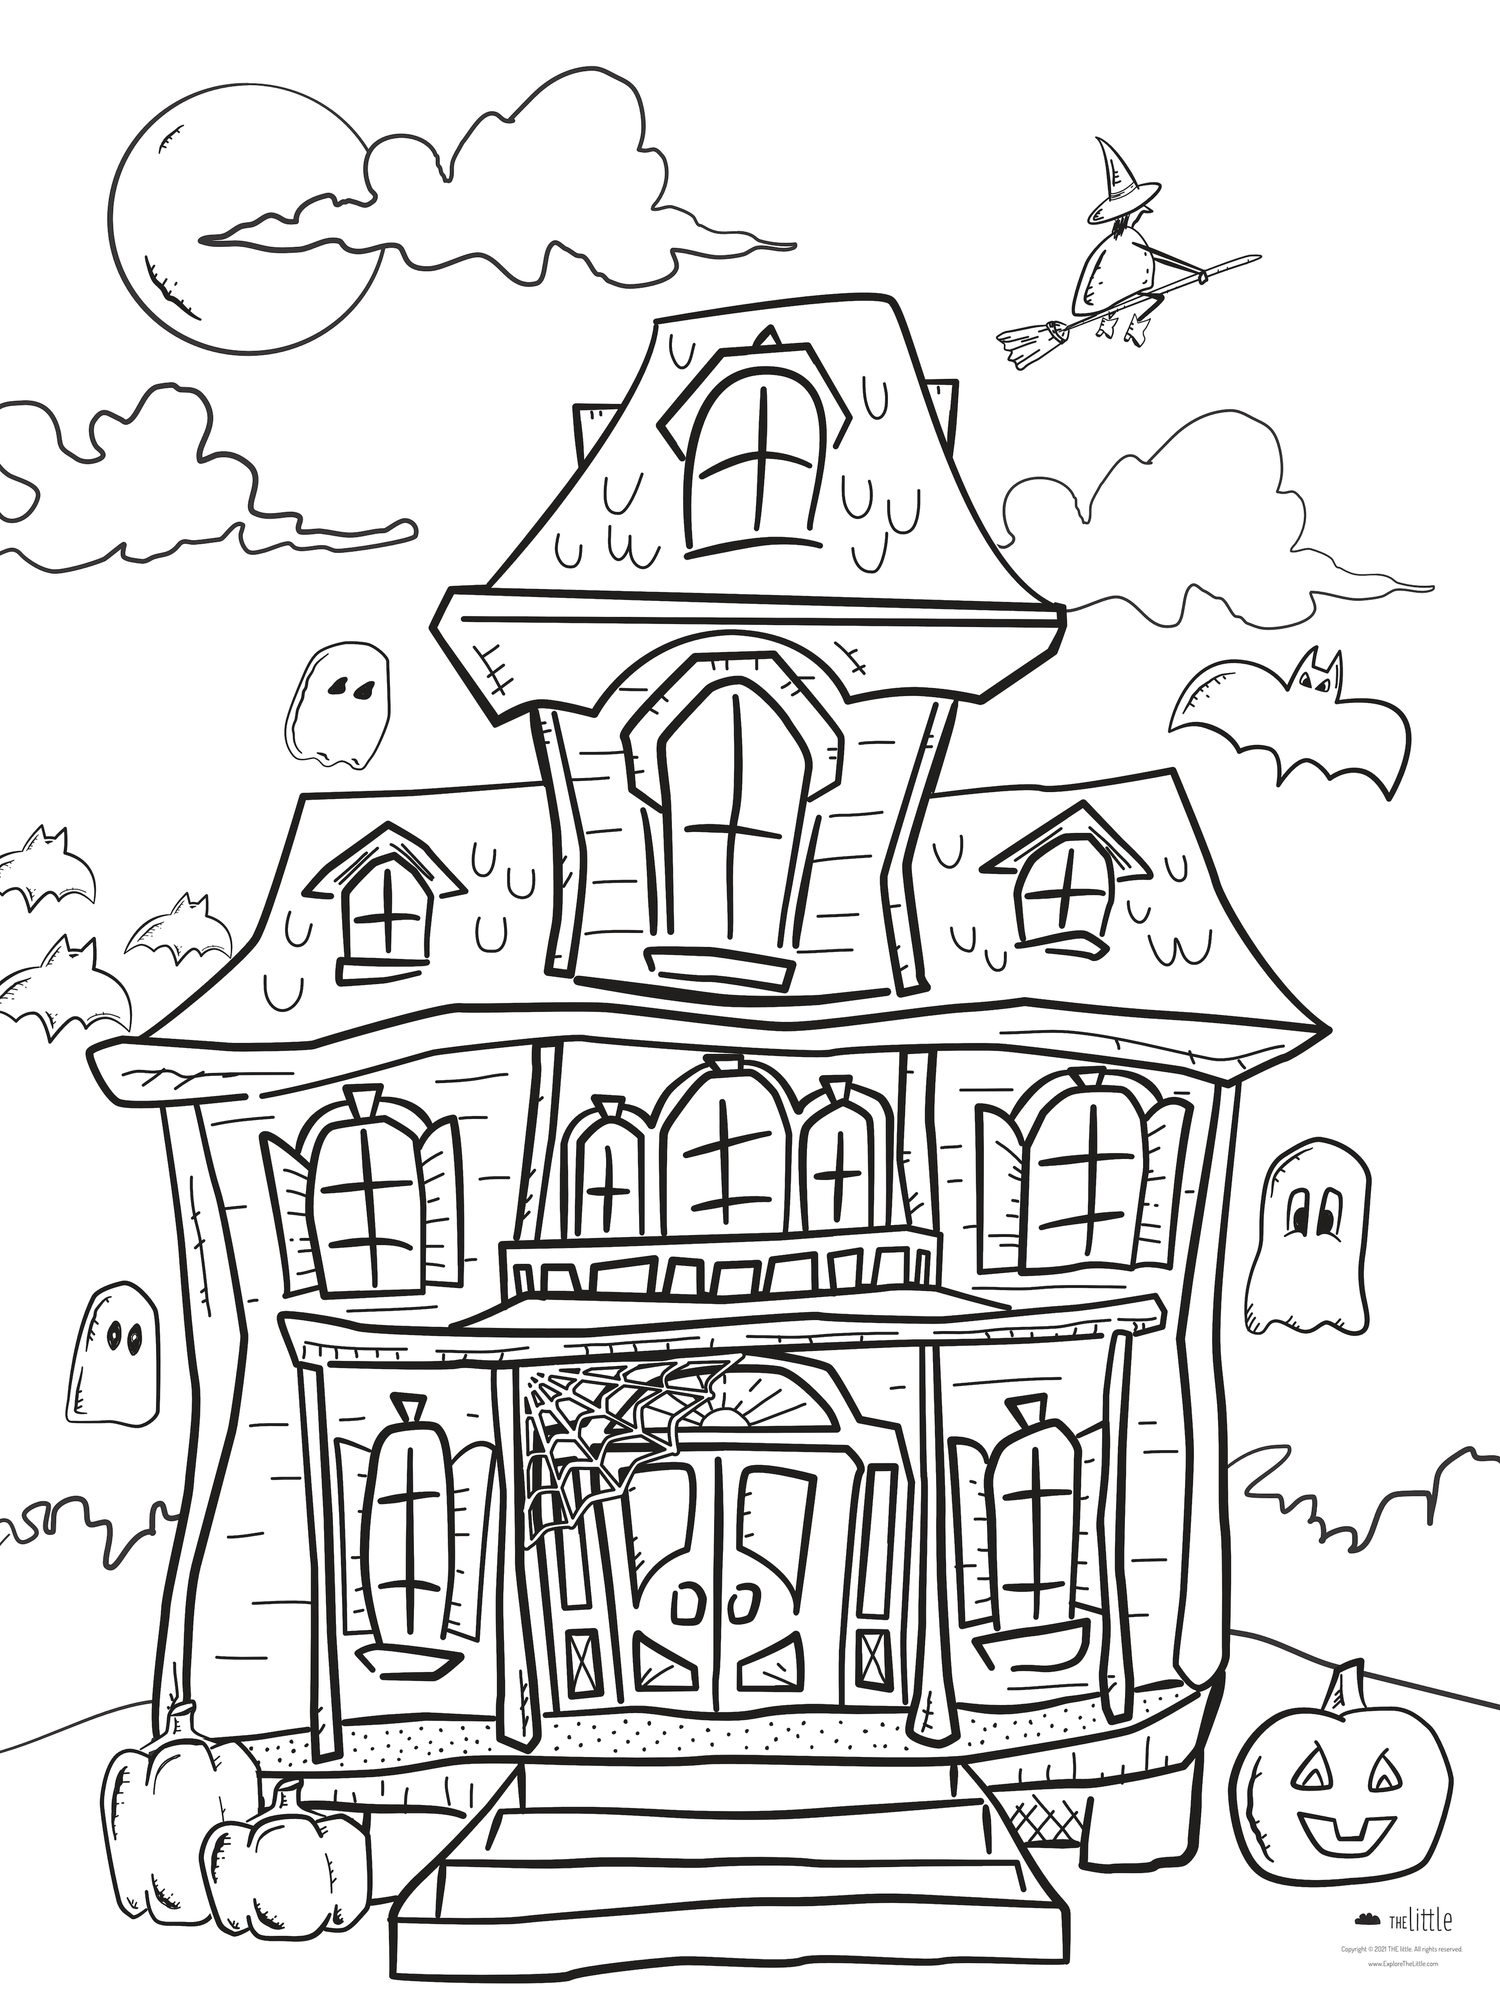 Giant haunted house coloring page digital download â the little